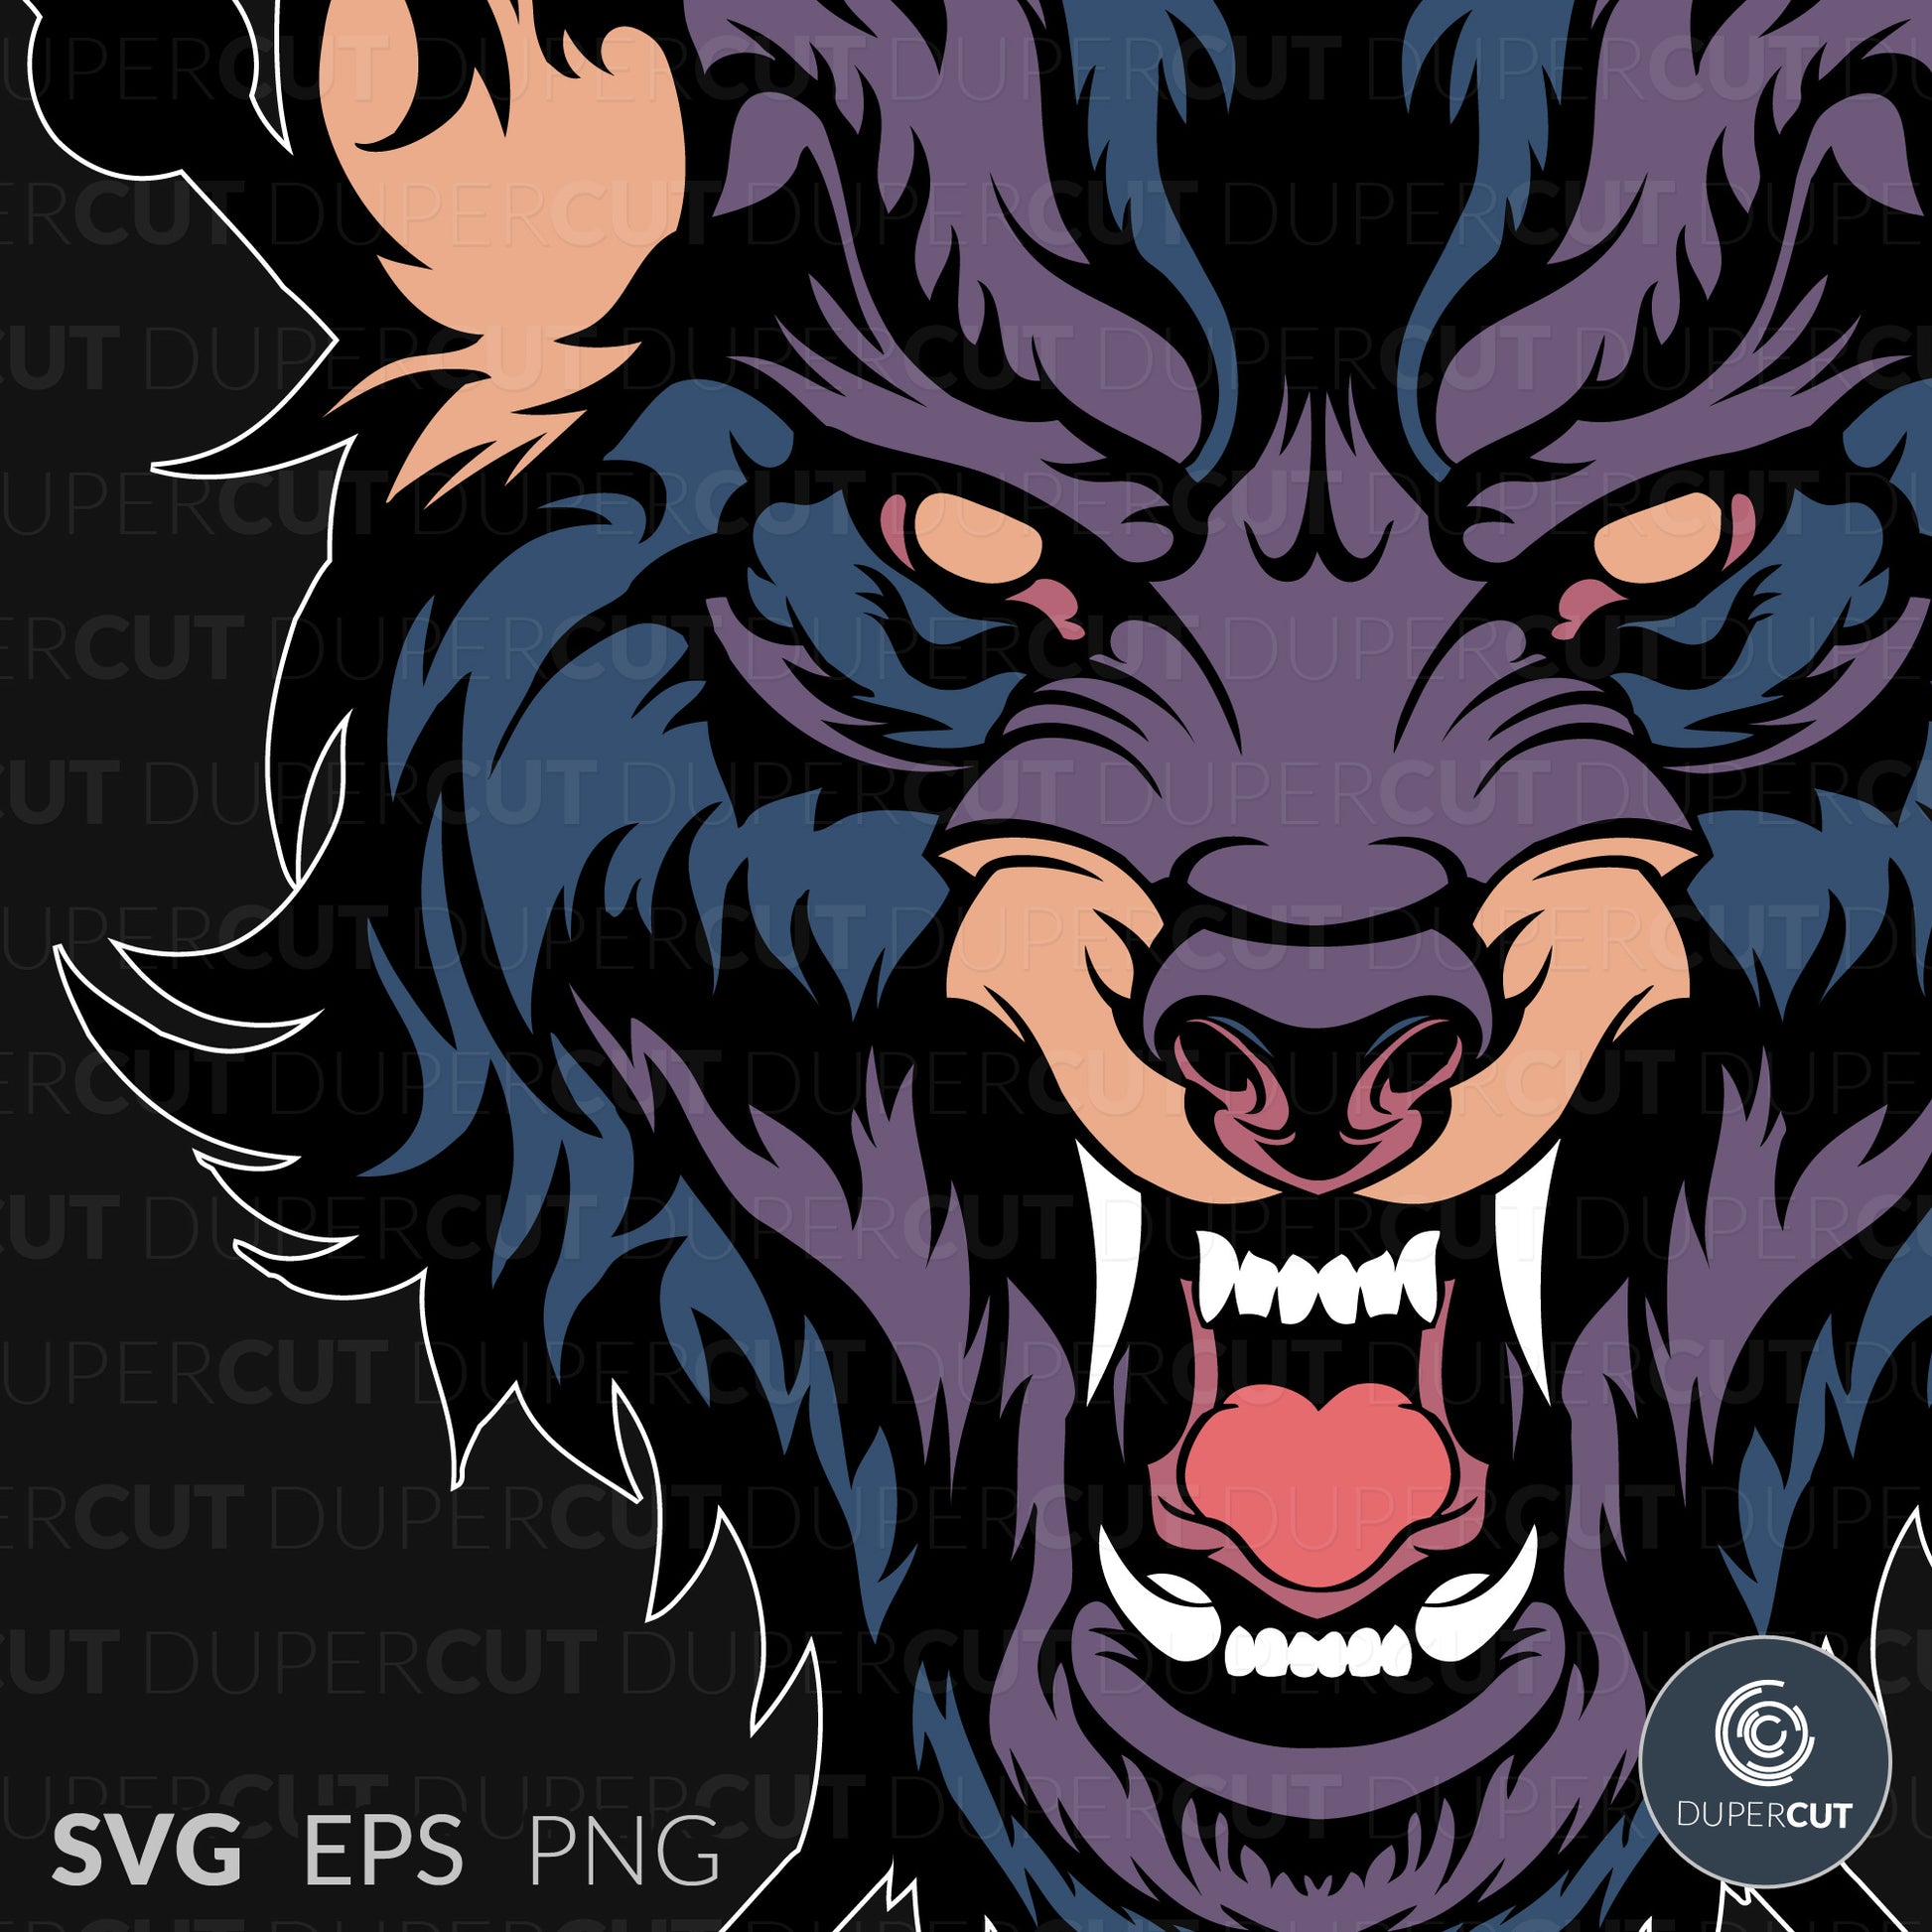 Wolf head - EPS, SVG, PNG files. Vector Colour illustration for print on demand, sublimation, custom t-shirts, hoodies, tumblers.